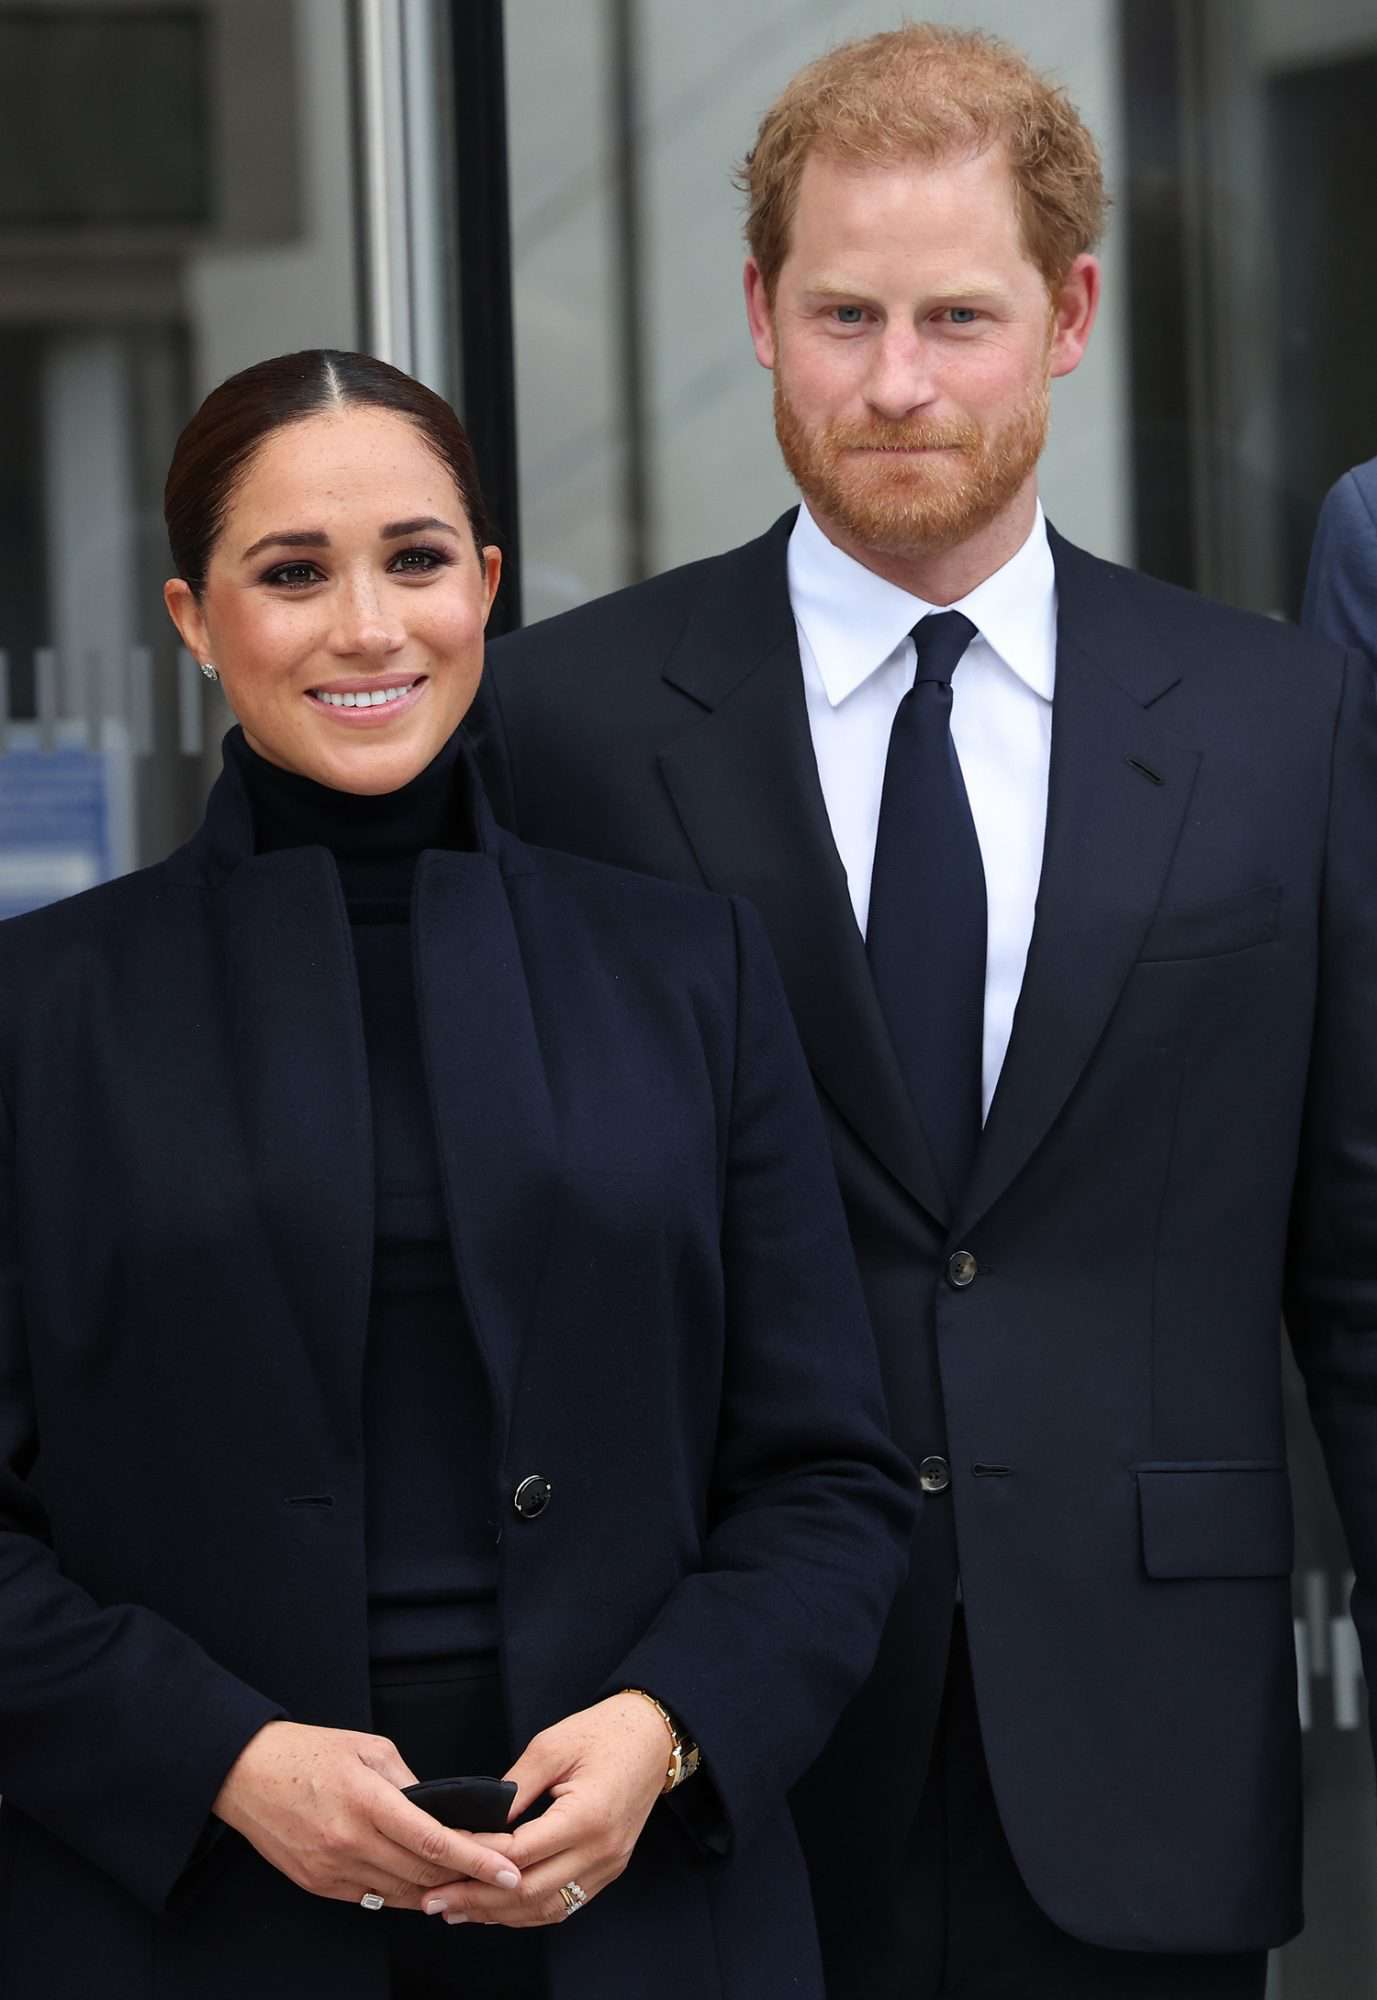 The Duke And Duchess Of Sussex Visit One World Observatory Meghan Markle prince harry